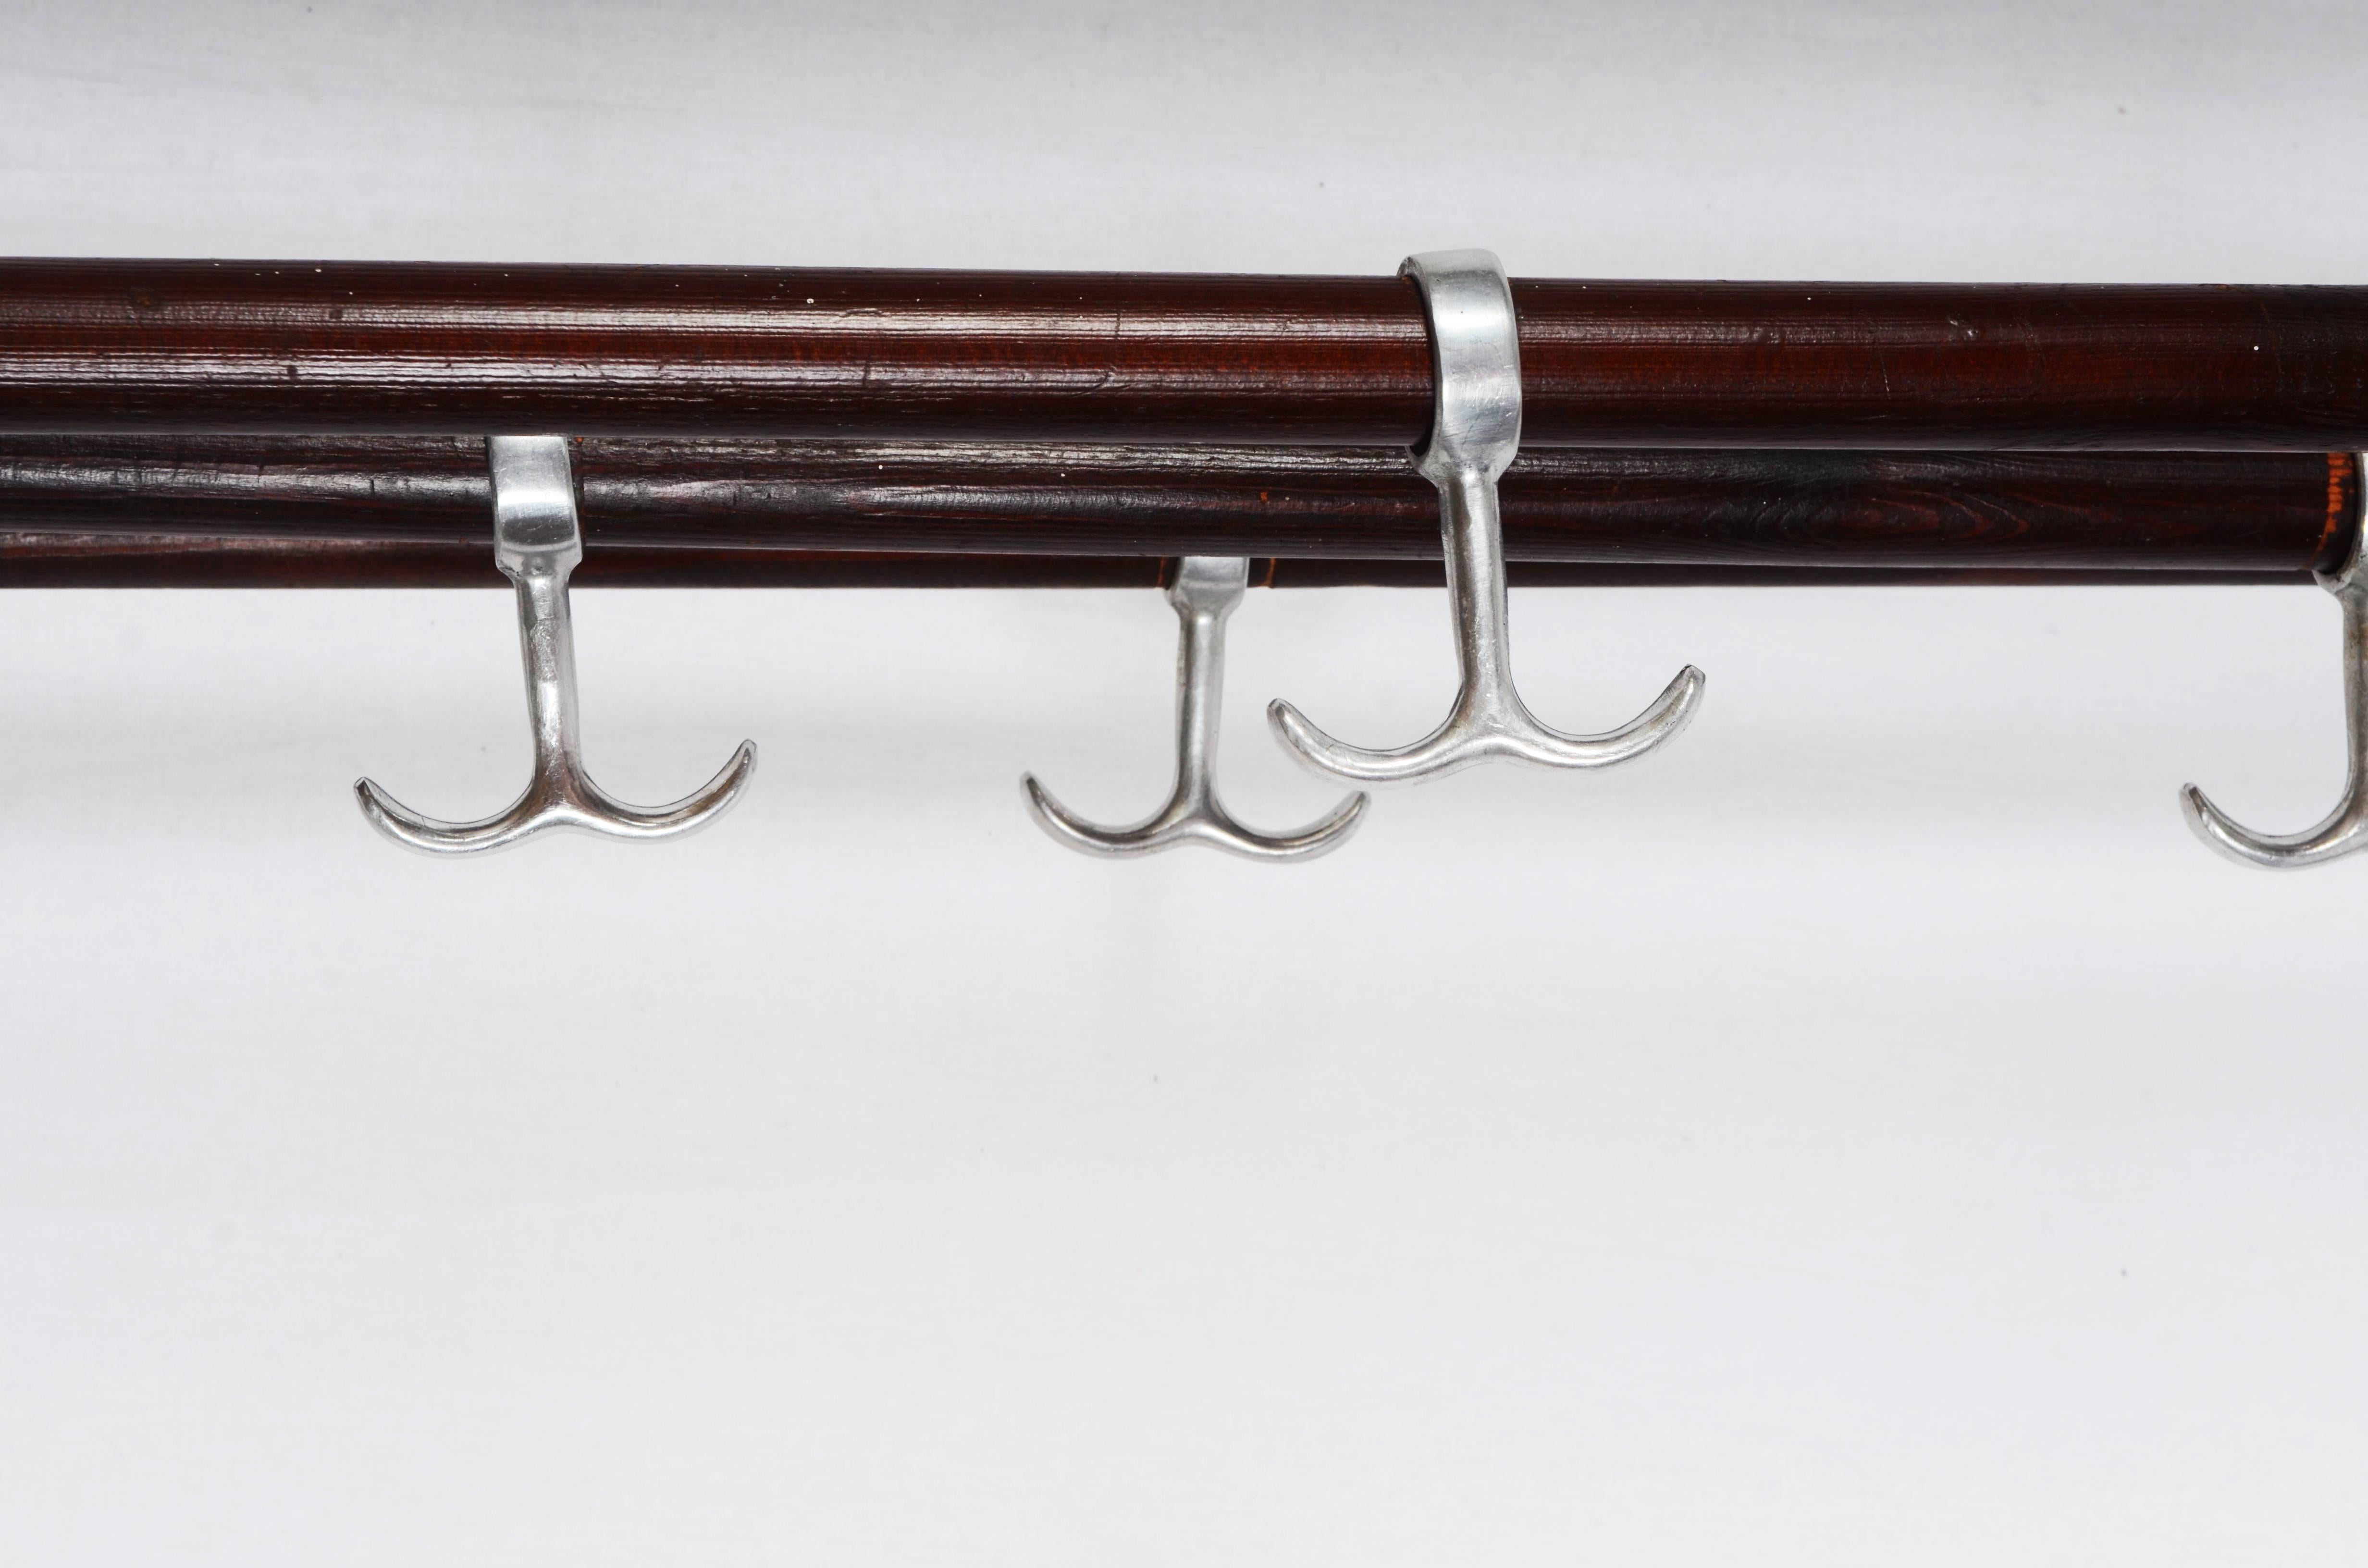 Swedish functionalistic coat rack made in the 1930-1940. Aluminum holders and hangers on beech wood bars.
The length is 100cm and it is 25cm deep.
 